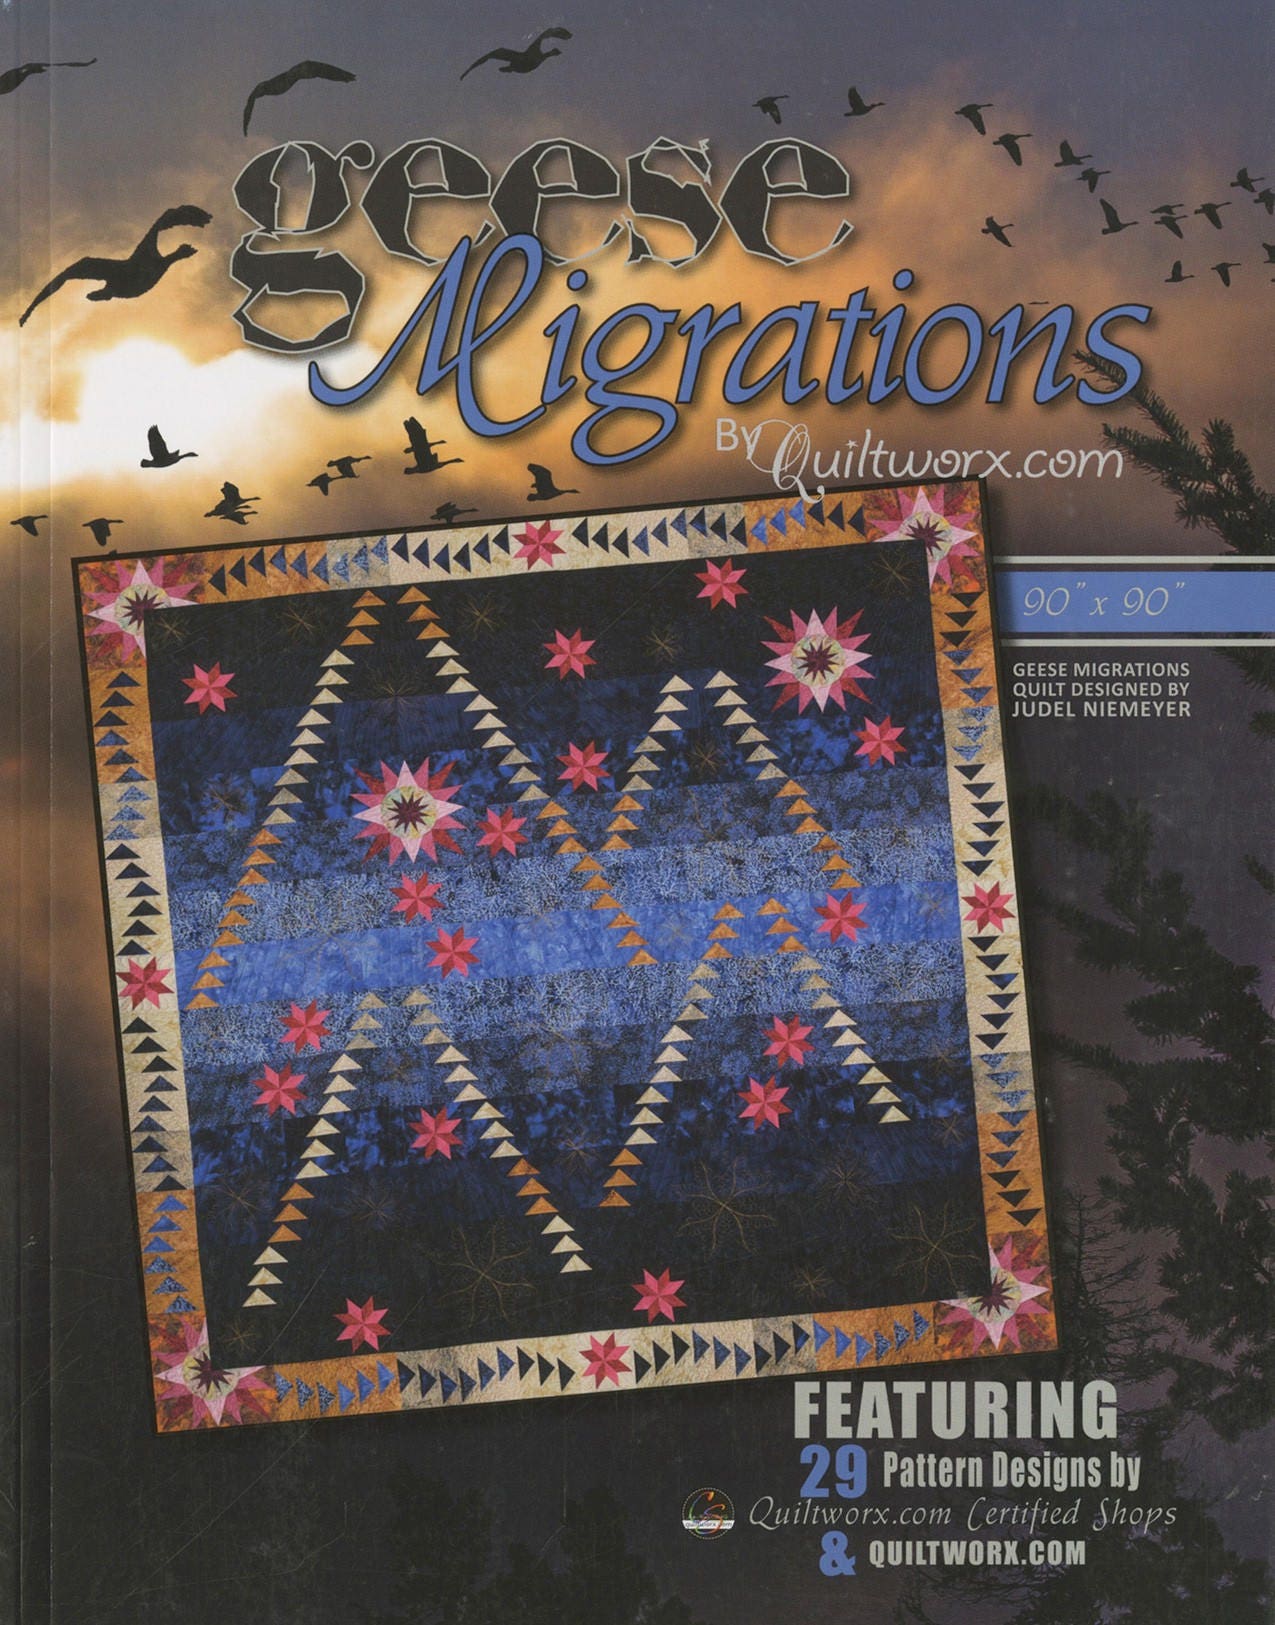 Geese Migrations Quilt Pattern Book by Judel Niemeyer and Quiltworx Certified Shops